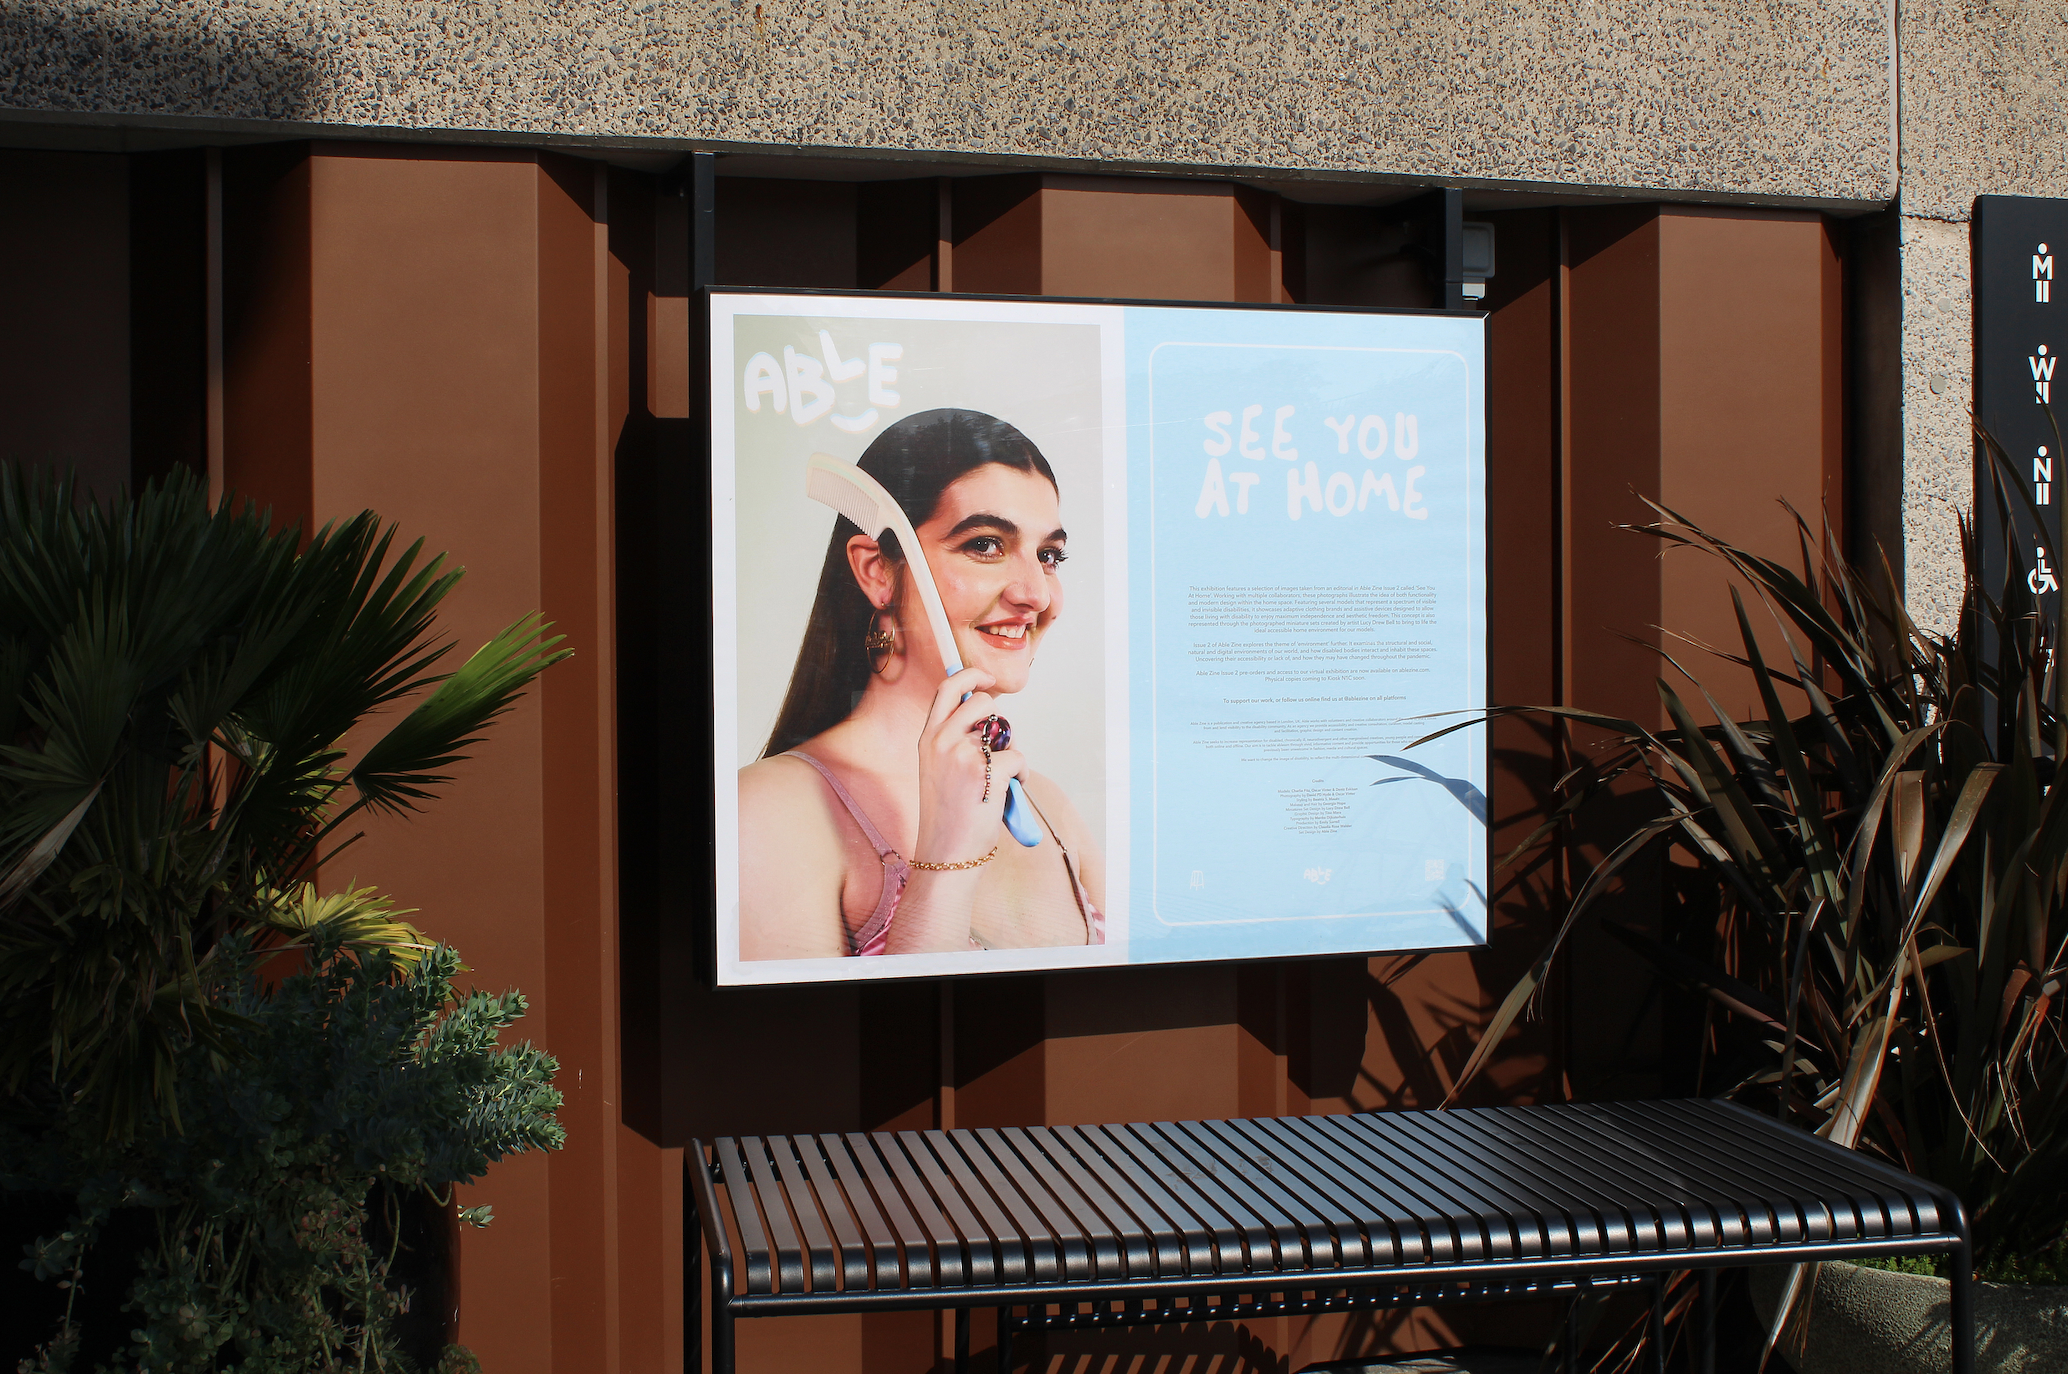 An image of the first lightbox at the outdoor exhibition. It shows a title and text describing the exhibition on one side, and on the other, a portrait photograph of model Charlie using an adaptive haircomb and looking directly into the camera